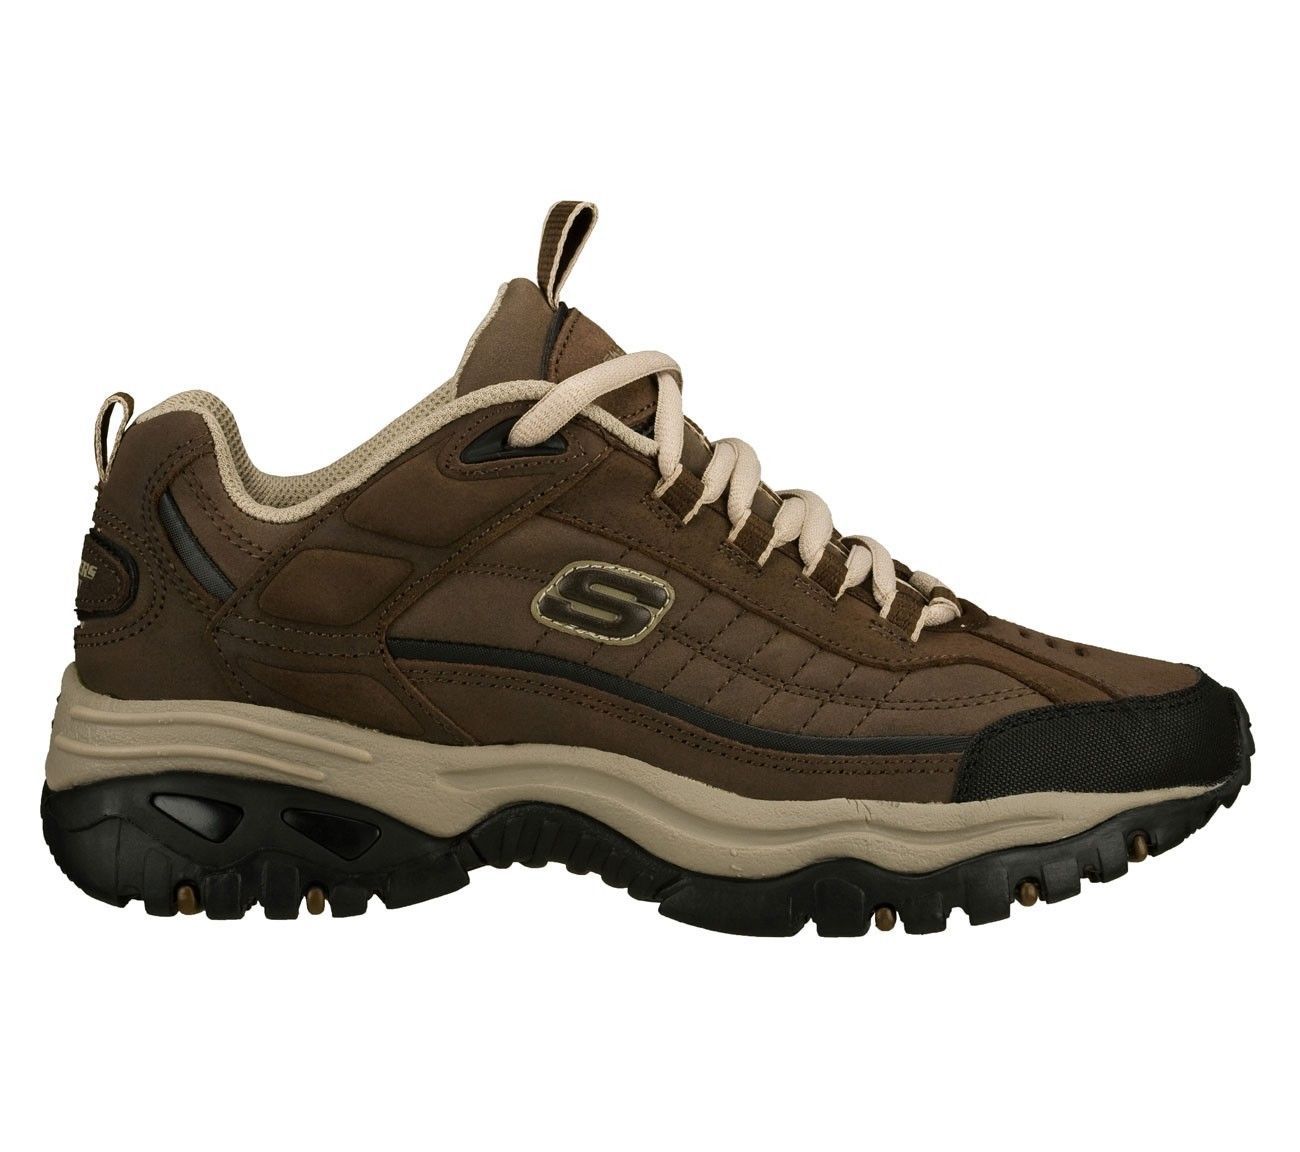 Skechers Brown shoes Men's Sport Casual Soft Leather Sneaker Memory ...